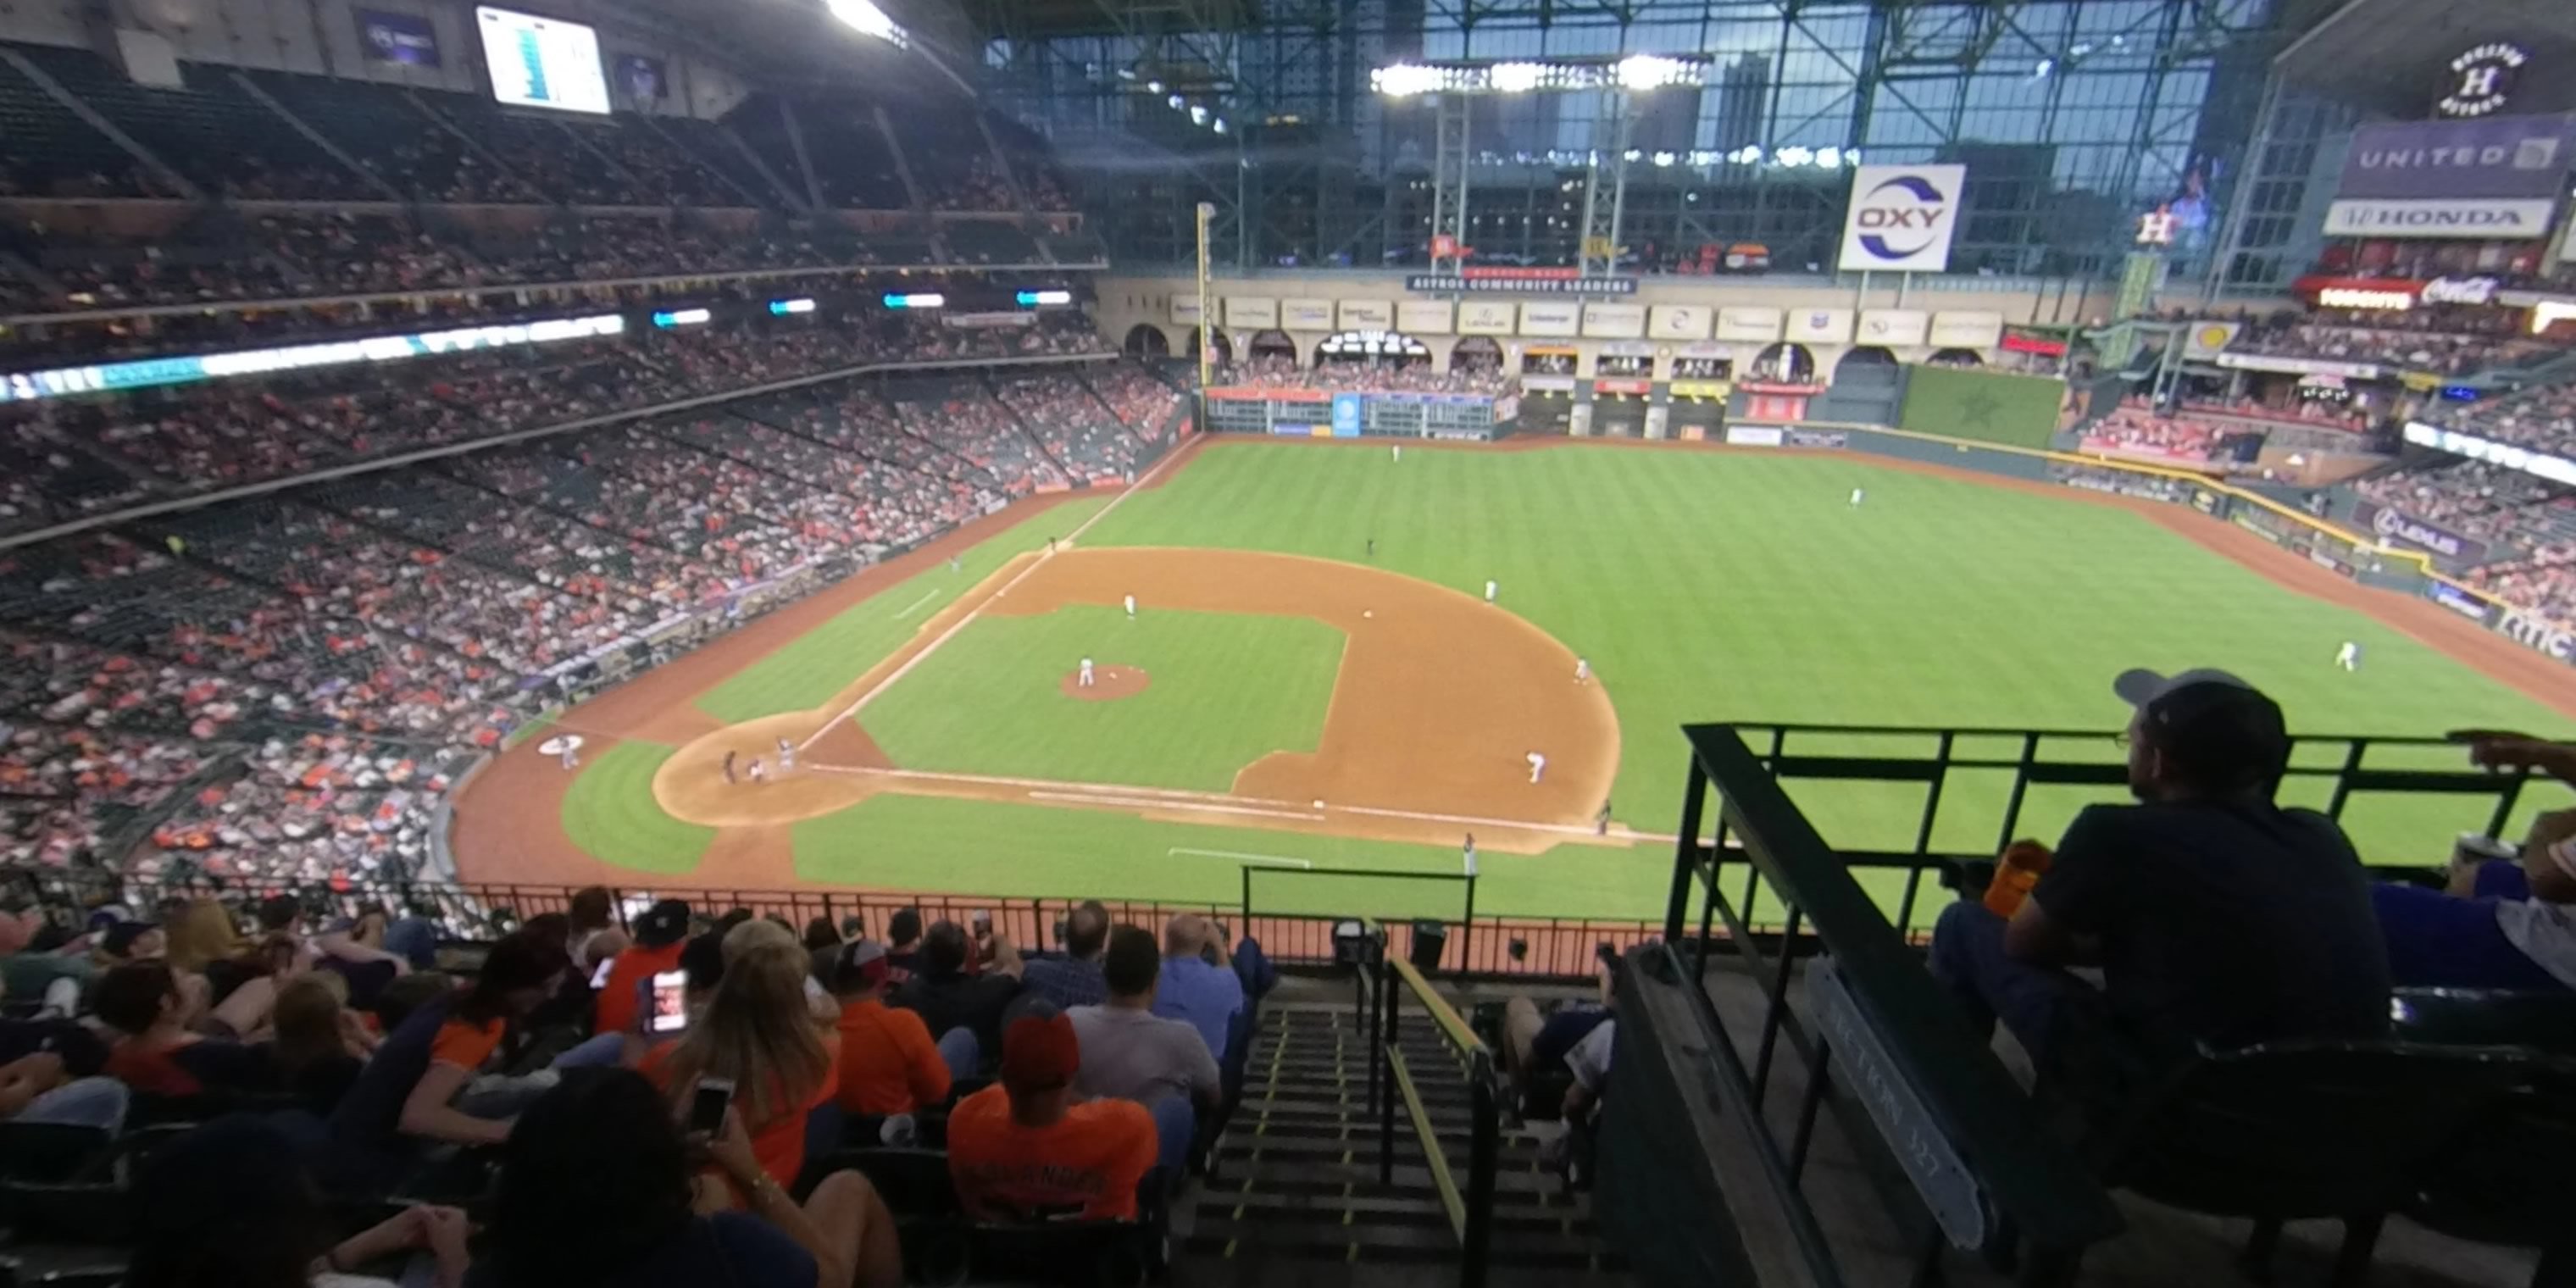 Section 327 at Minute Maid Park 